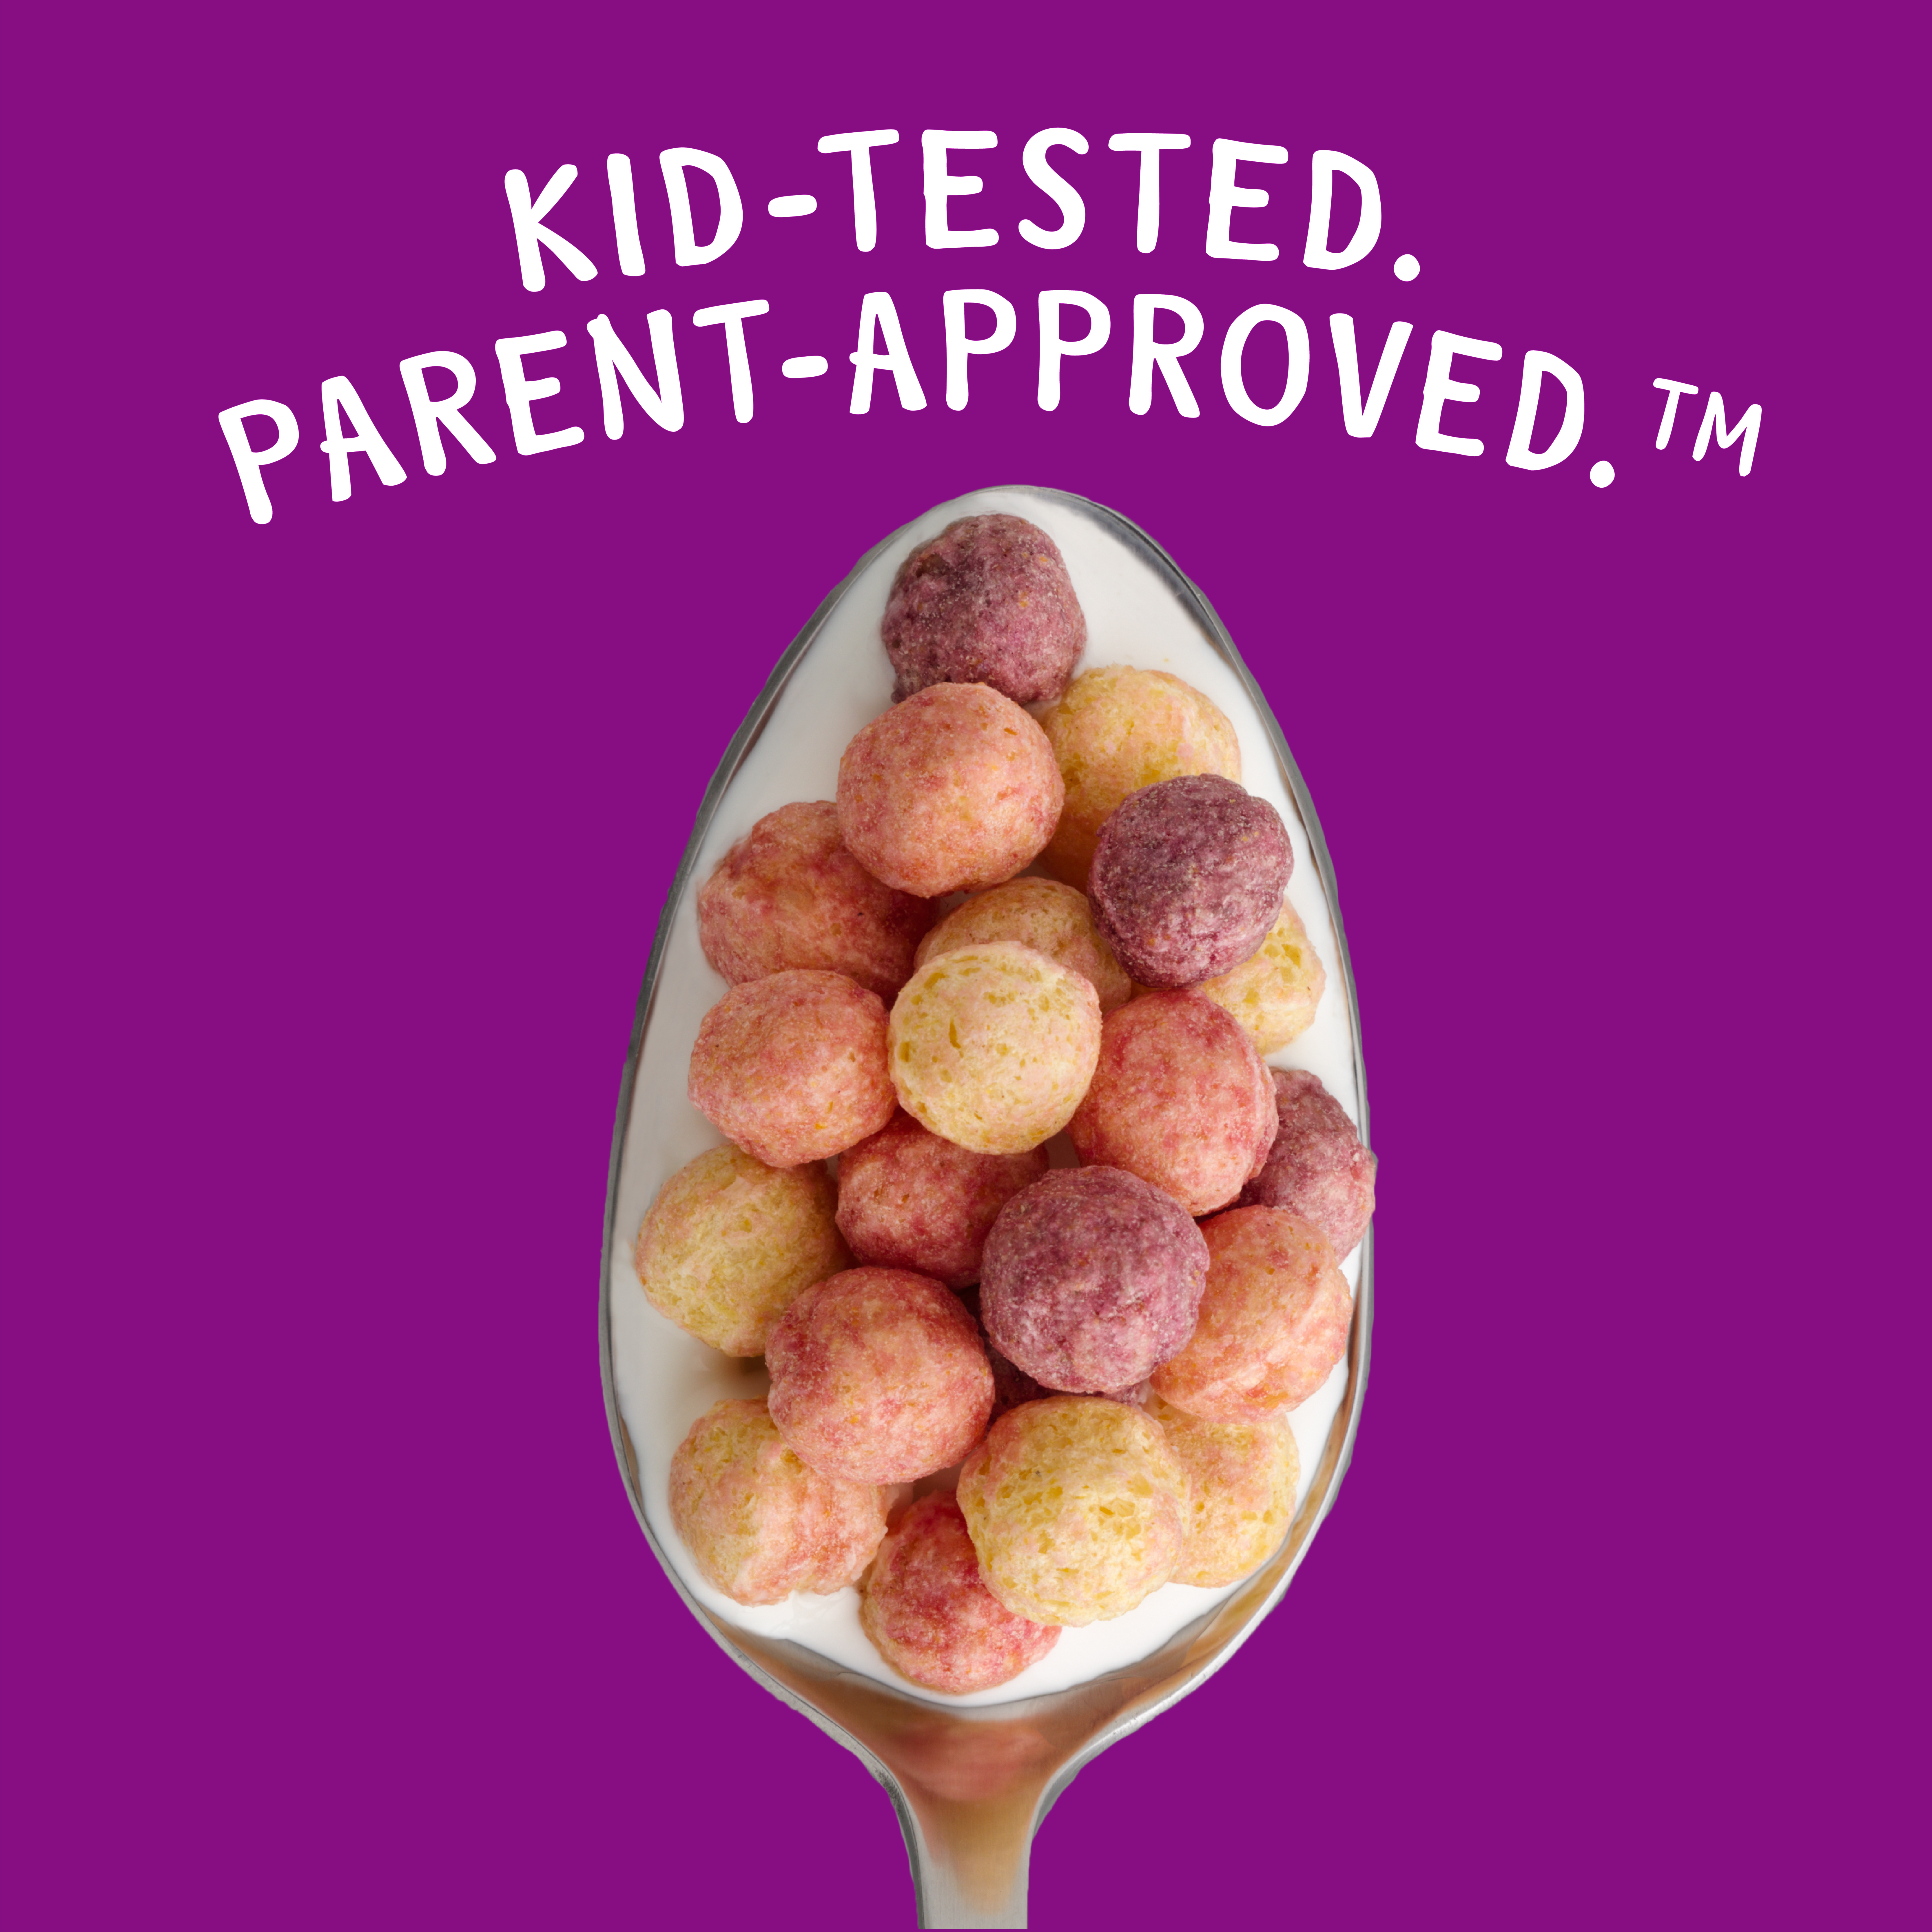 Spoonful of Berry Kix with slogan "Kid-tested. Parent-approved."